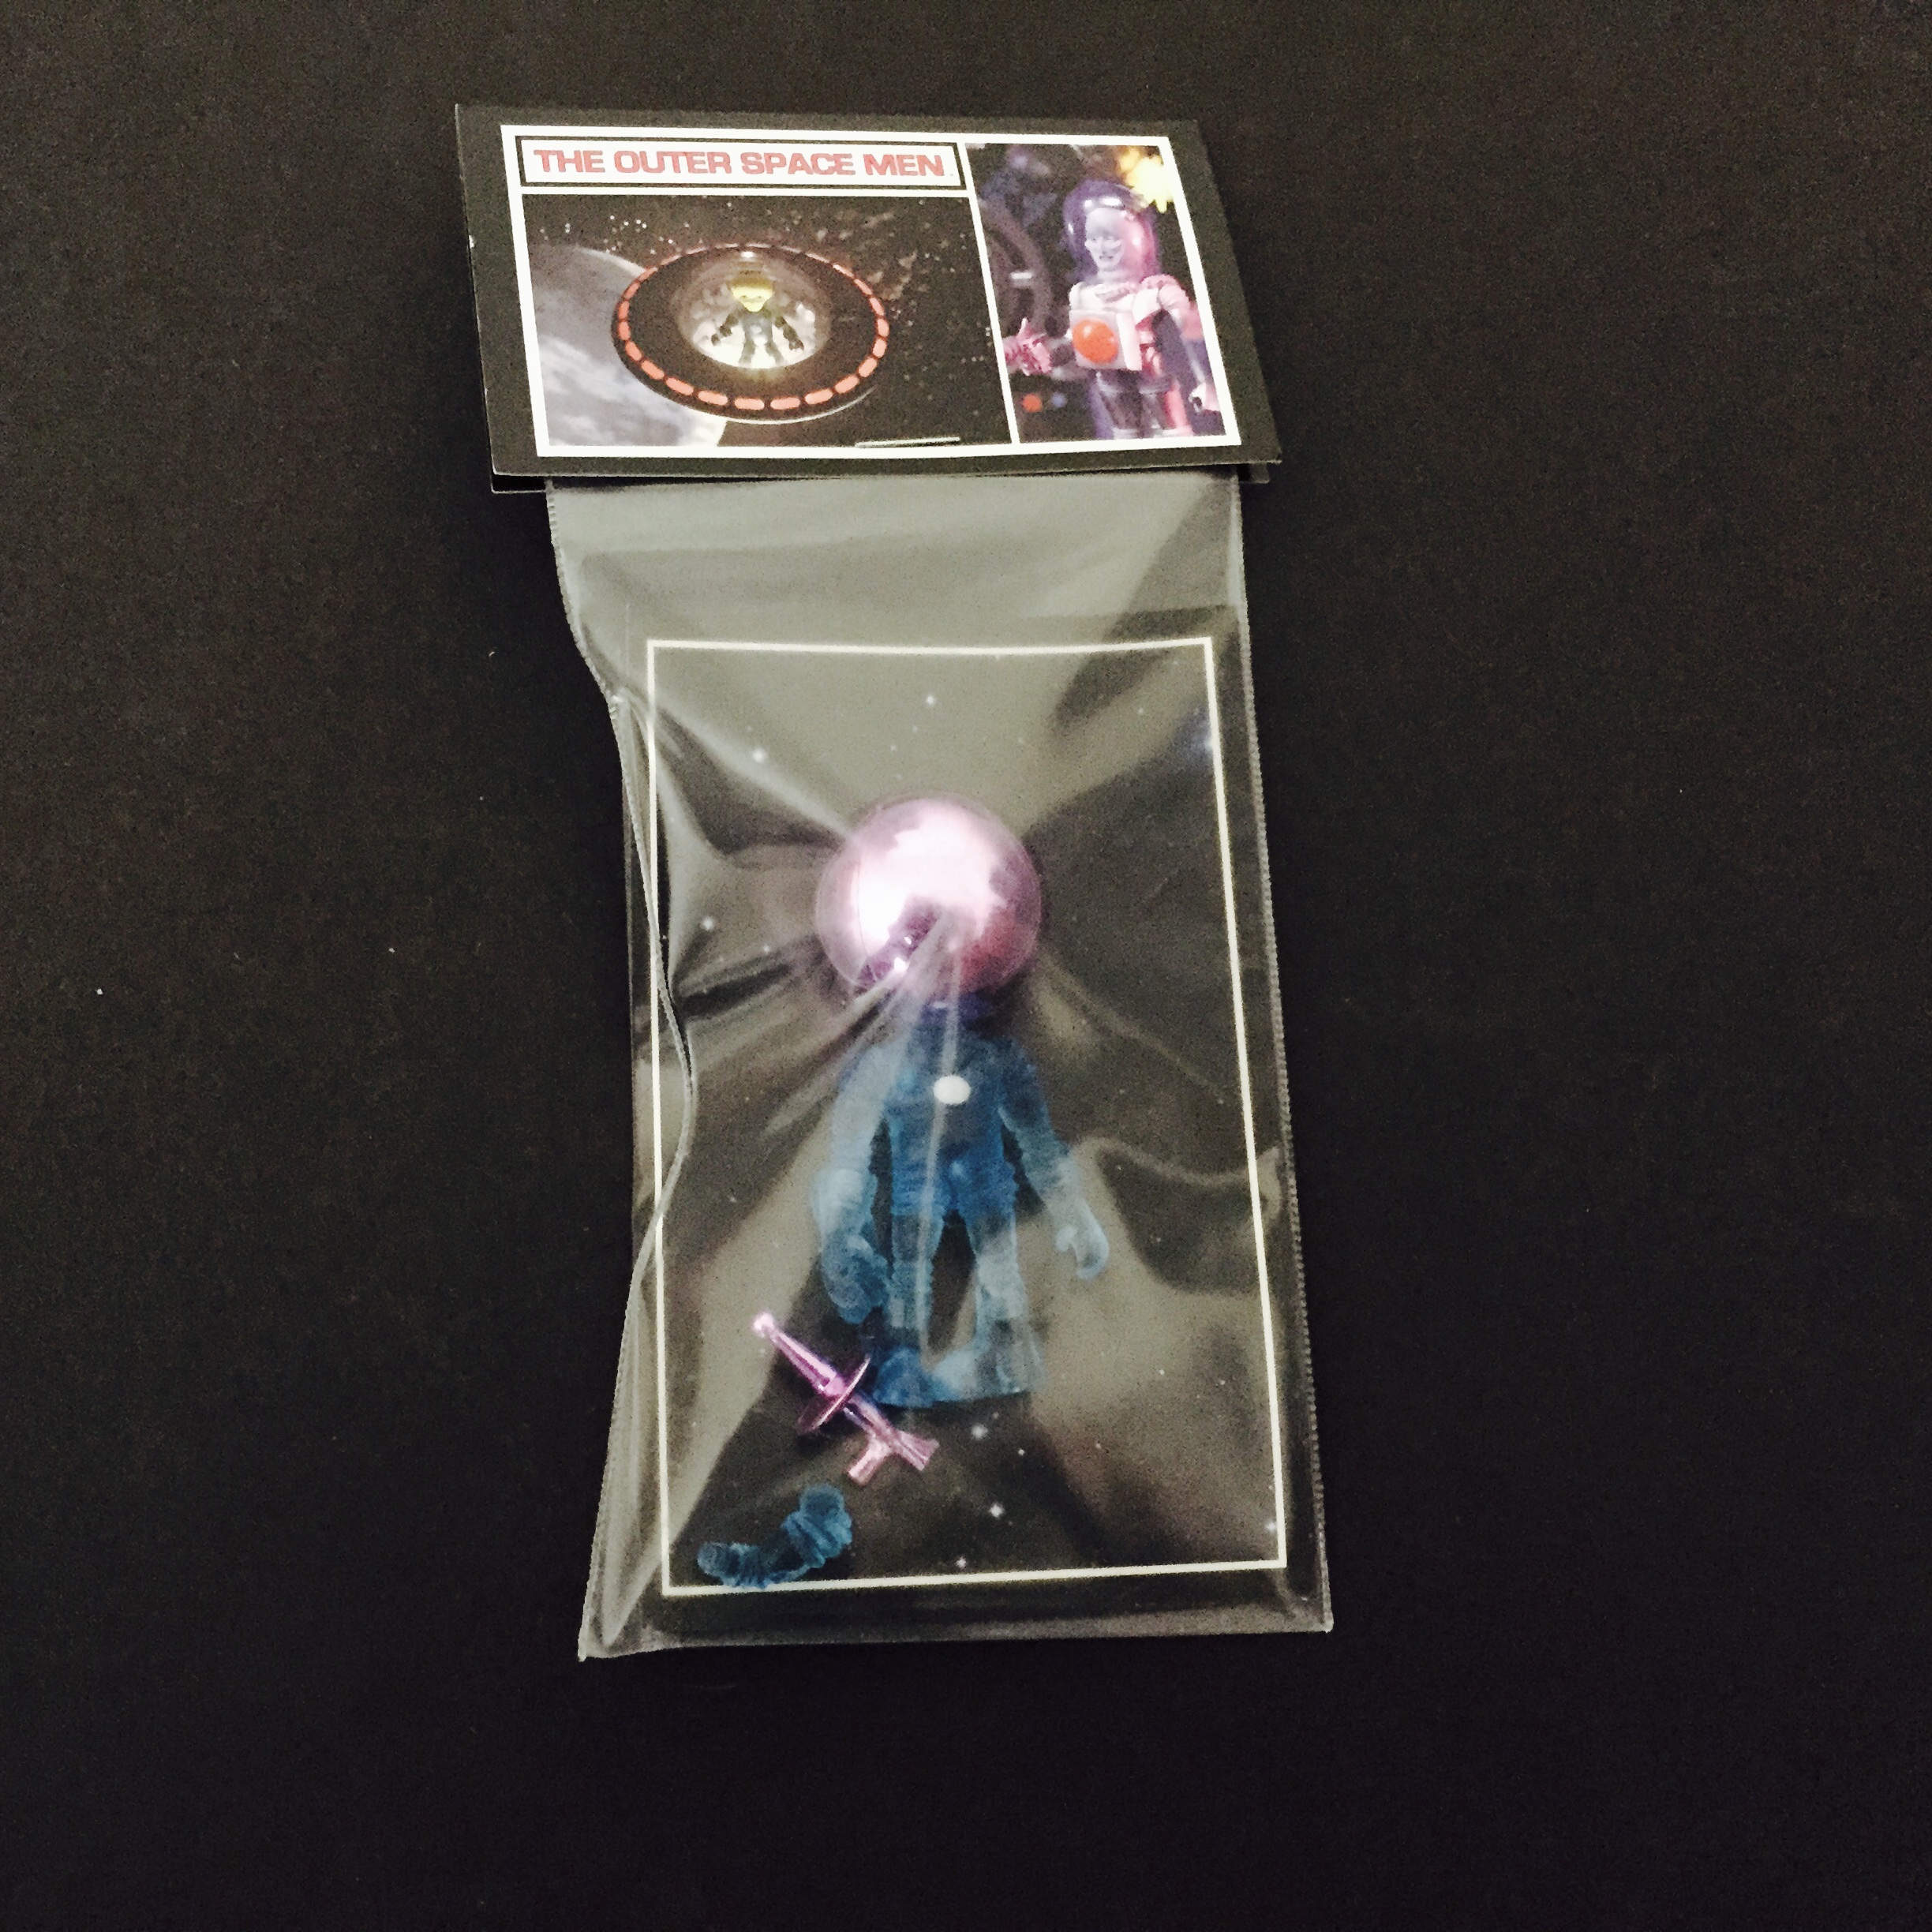 A 2011 GALACTIC HOLIDAY ALPHA 7 CLEAR BLUE WITH LAVENDER ACCESSORIES in a package.